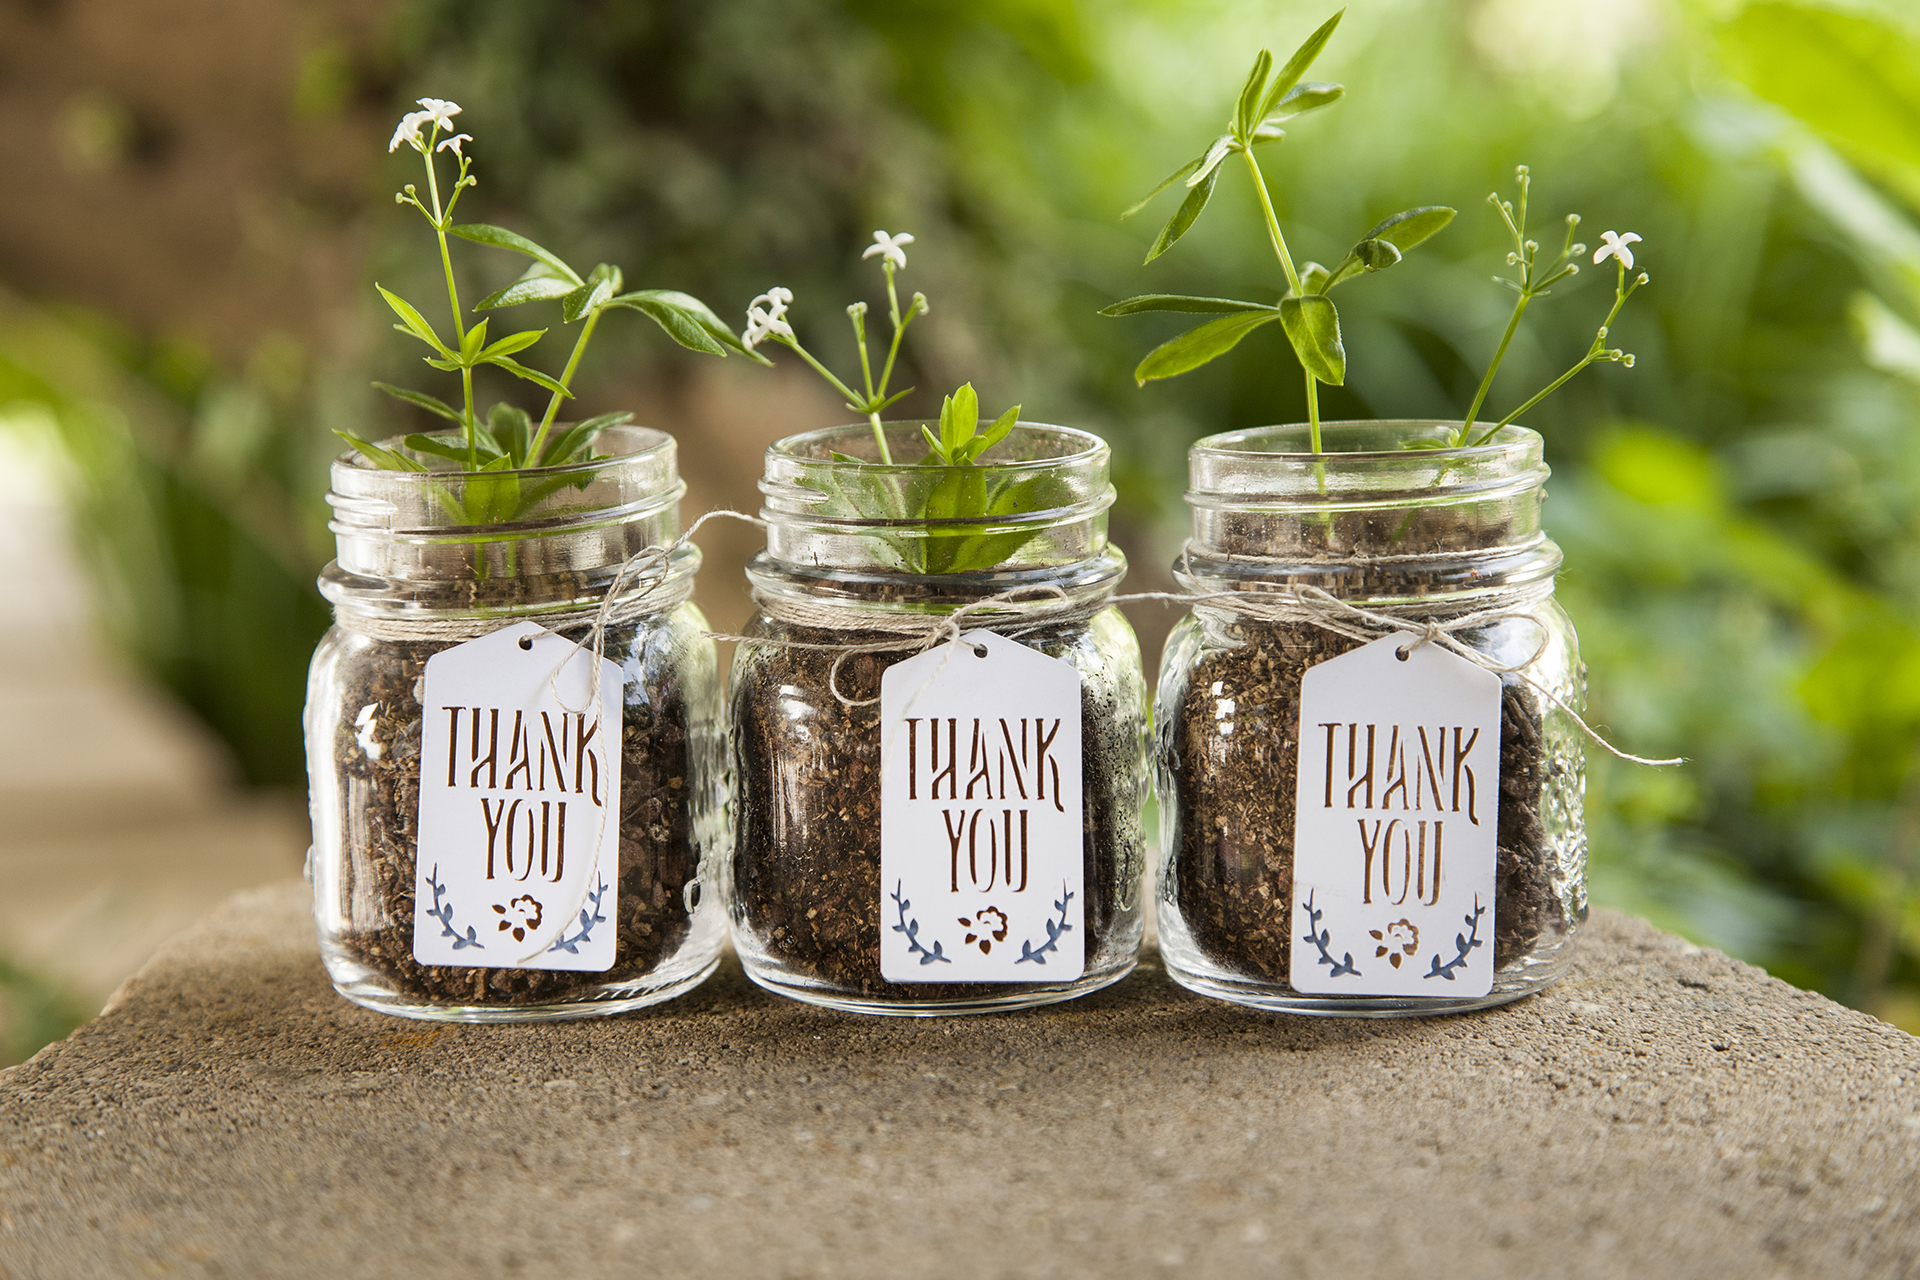 Three glass mason jars with dirt and a plant inside that has a "thank you" tag on the front of each jar